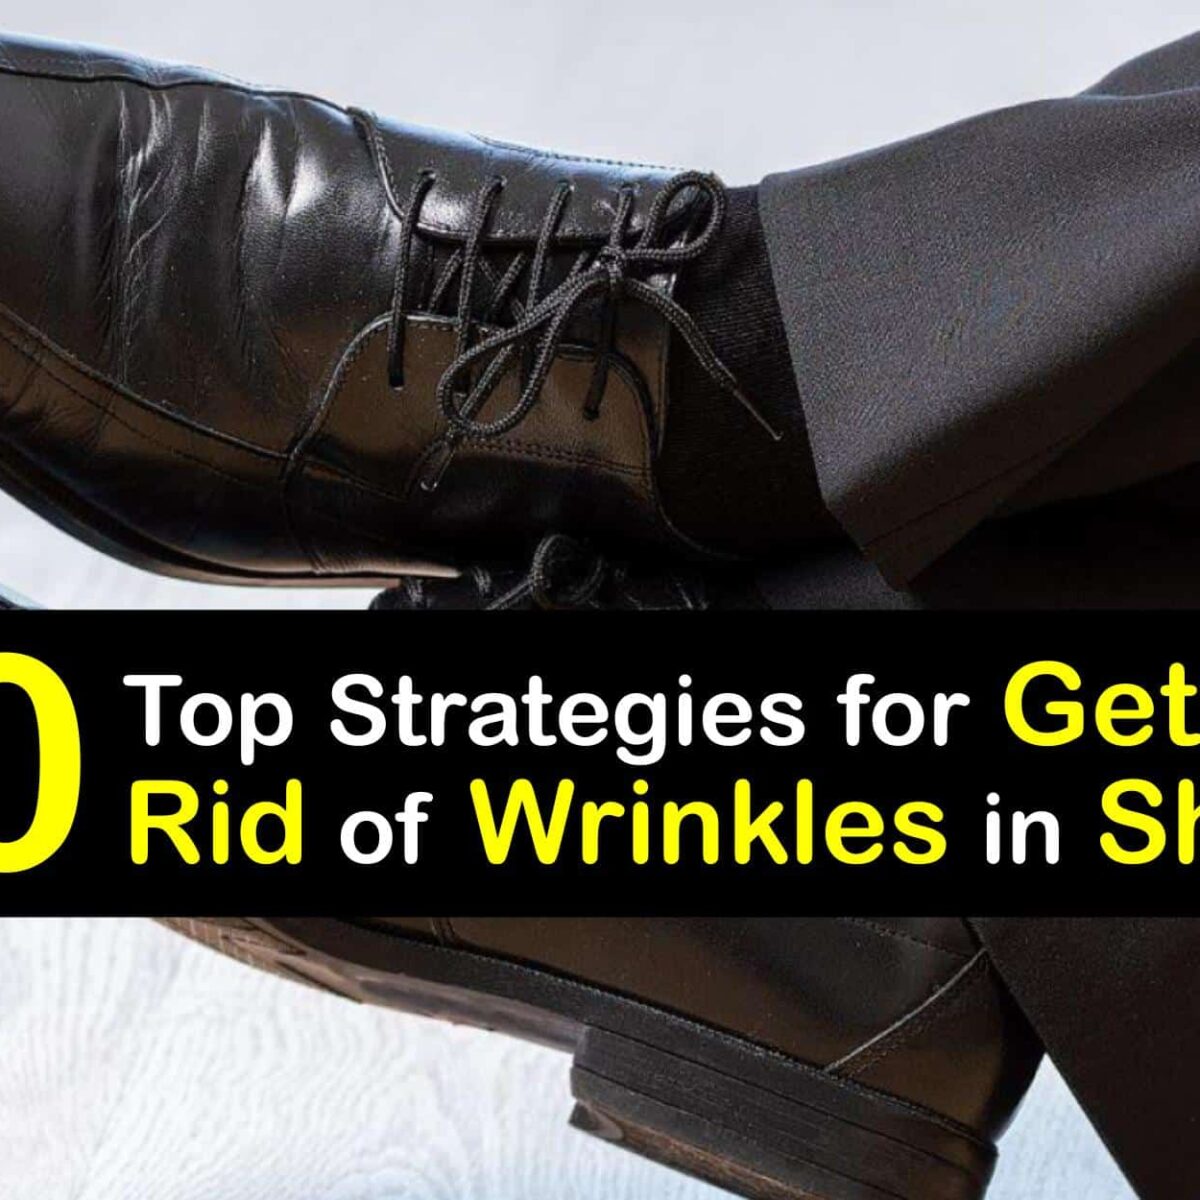 Wrinkled Shoe Care - Tricks for Removing Wrinkles from Shoes